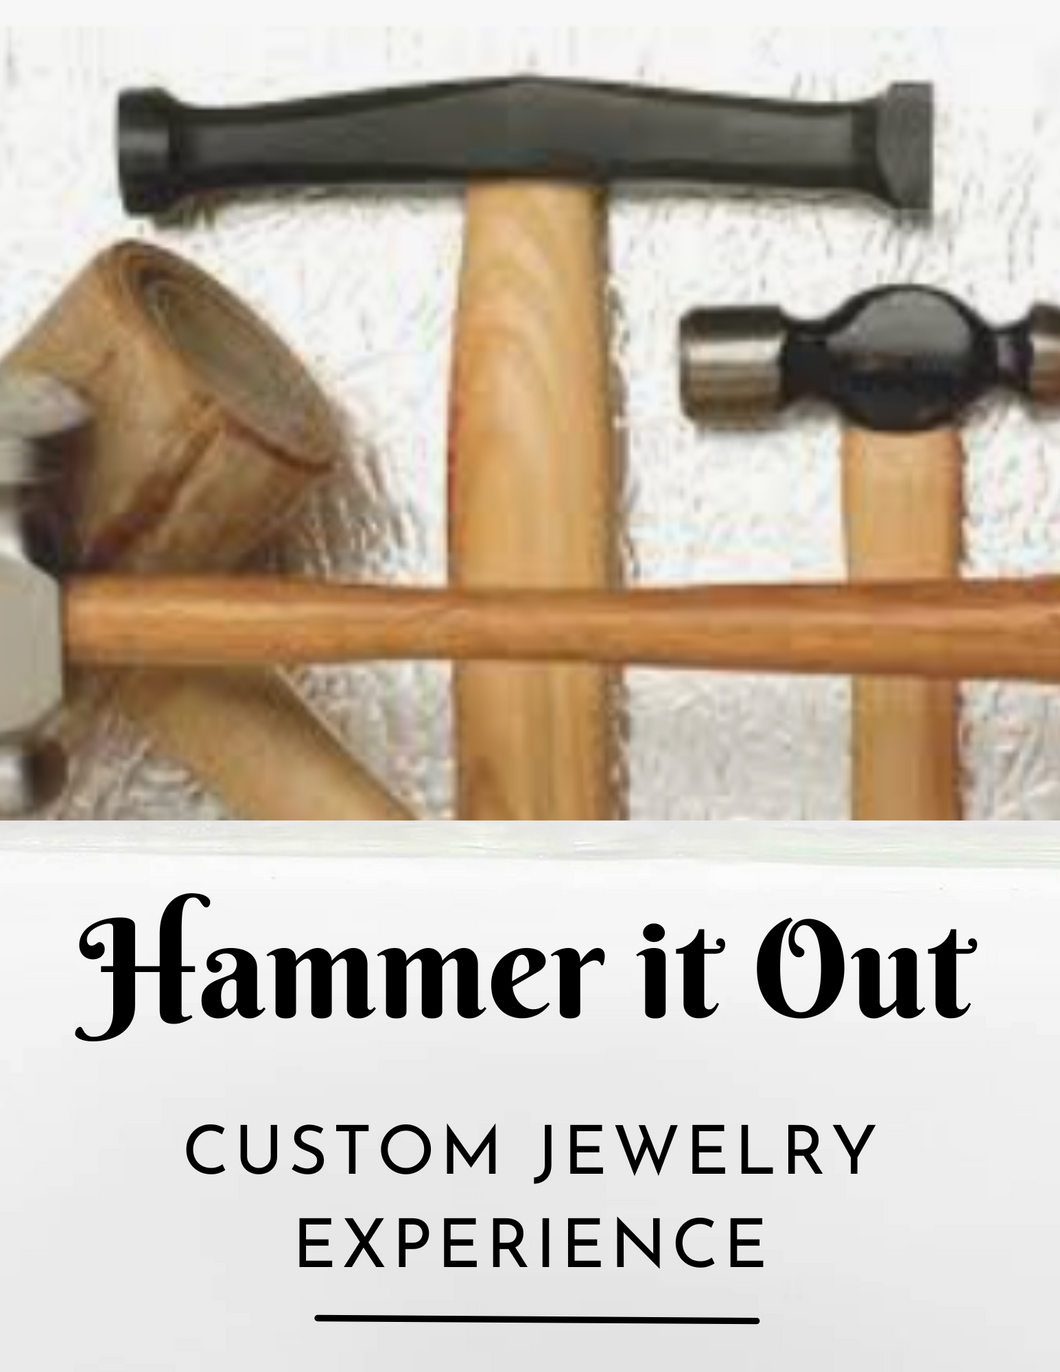 Hammer it Out Experience